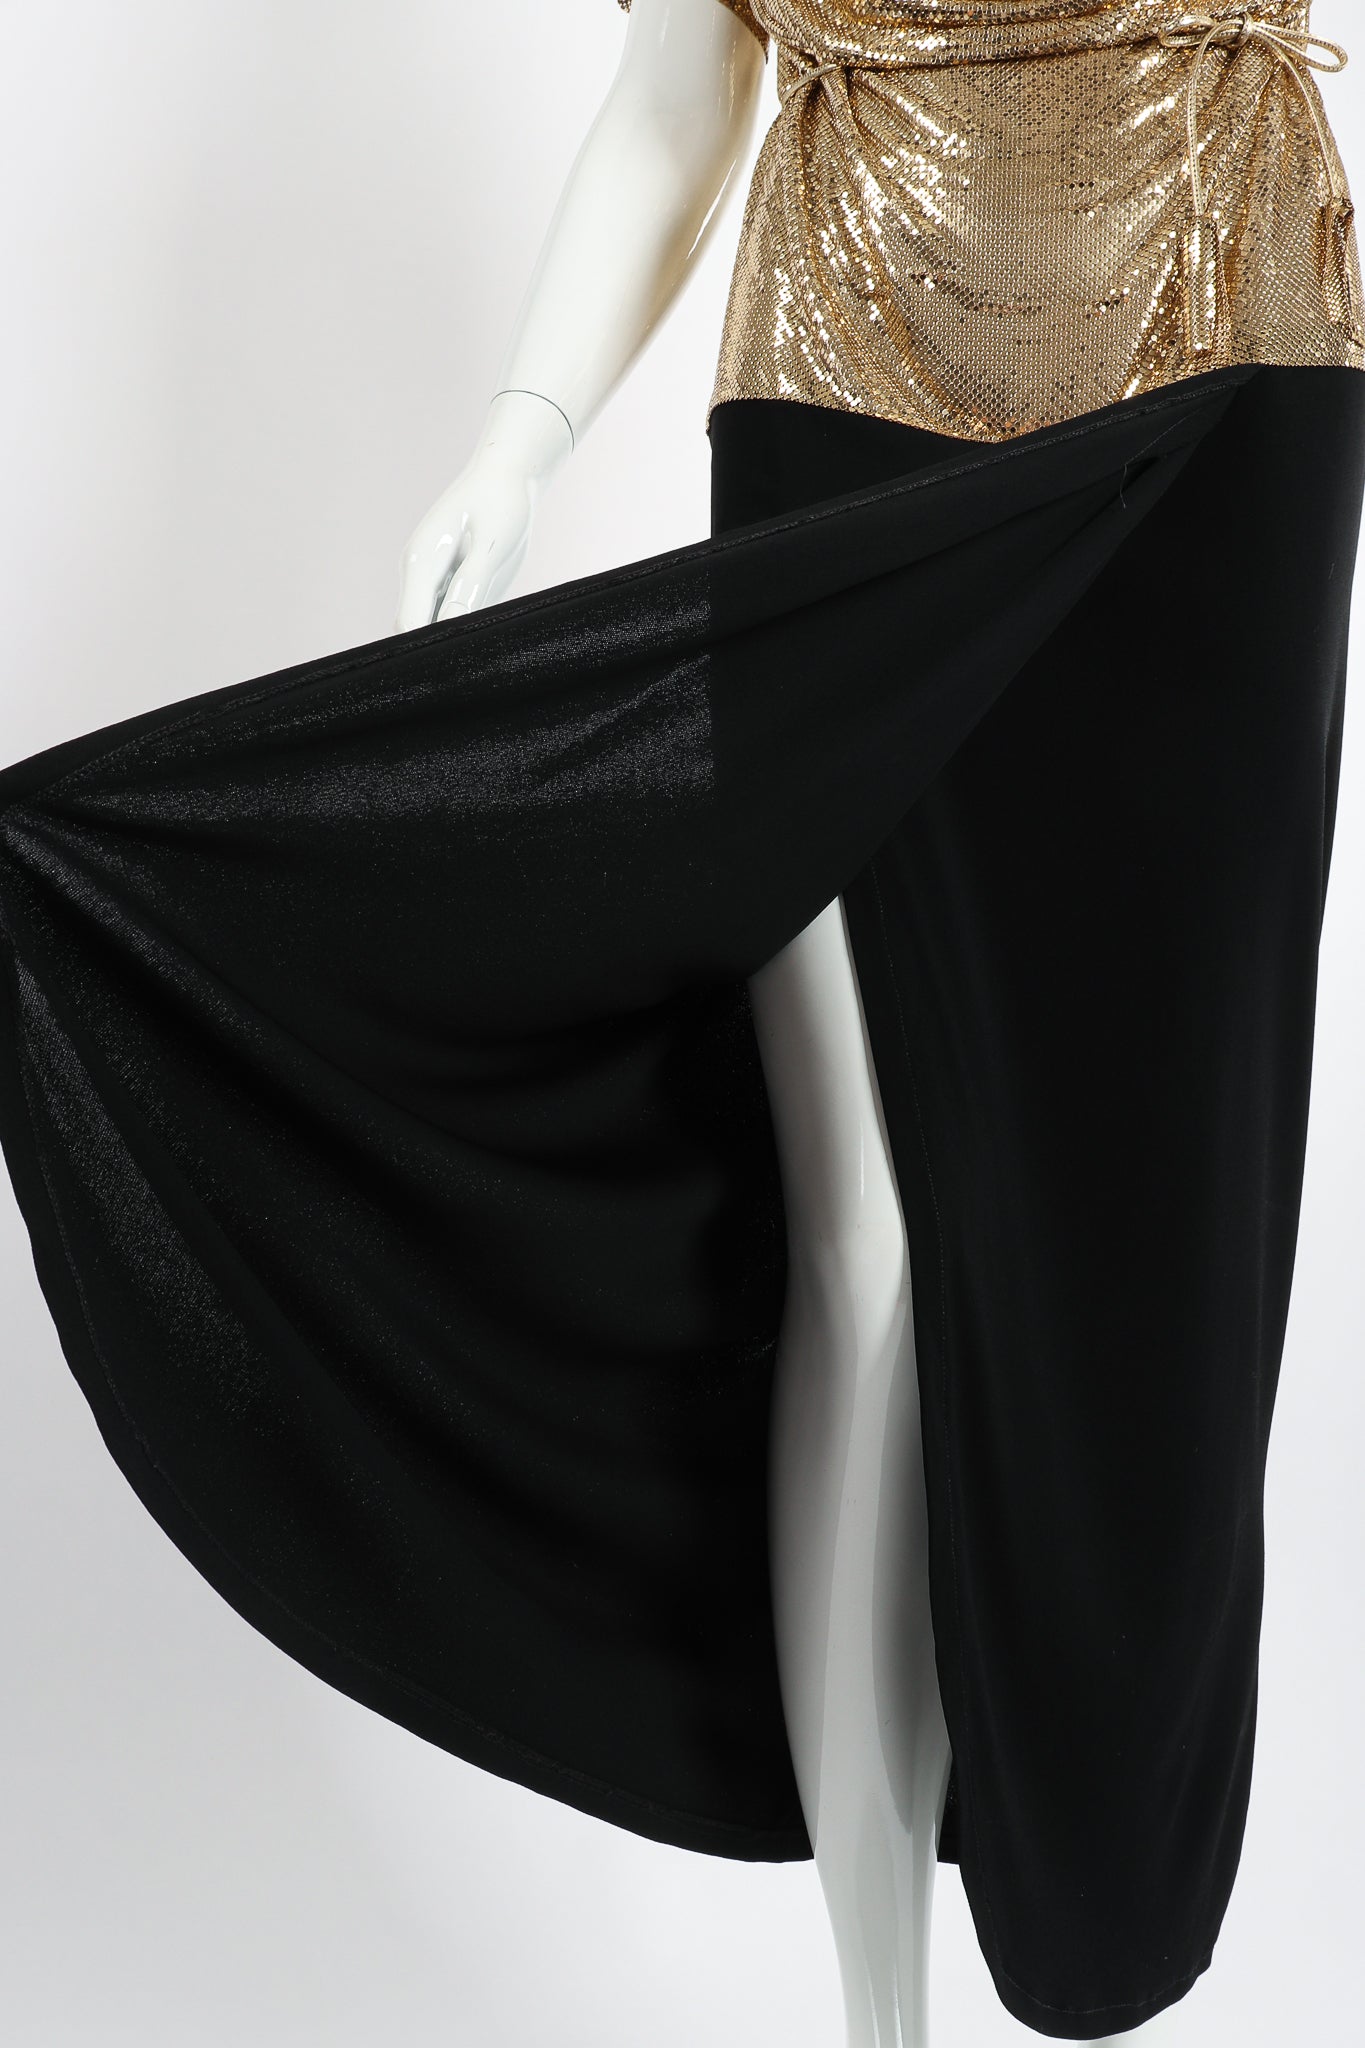 Vintage Anthony Ferrara Gold Mesh Draped Cowl Dress on Mannequin Skirt at Recess Los Angeles